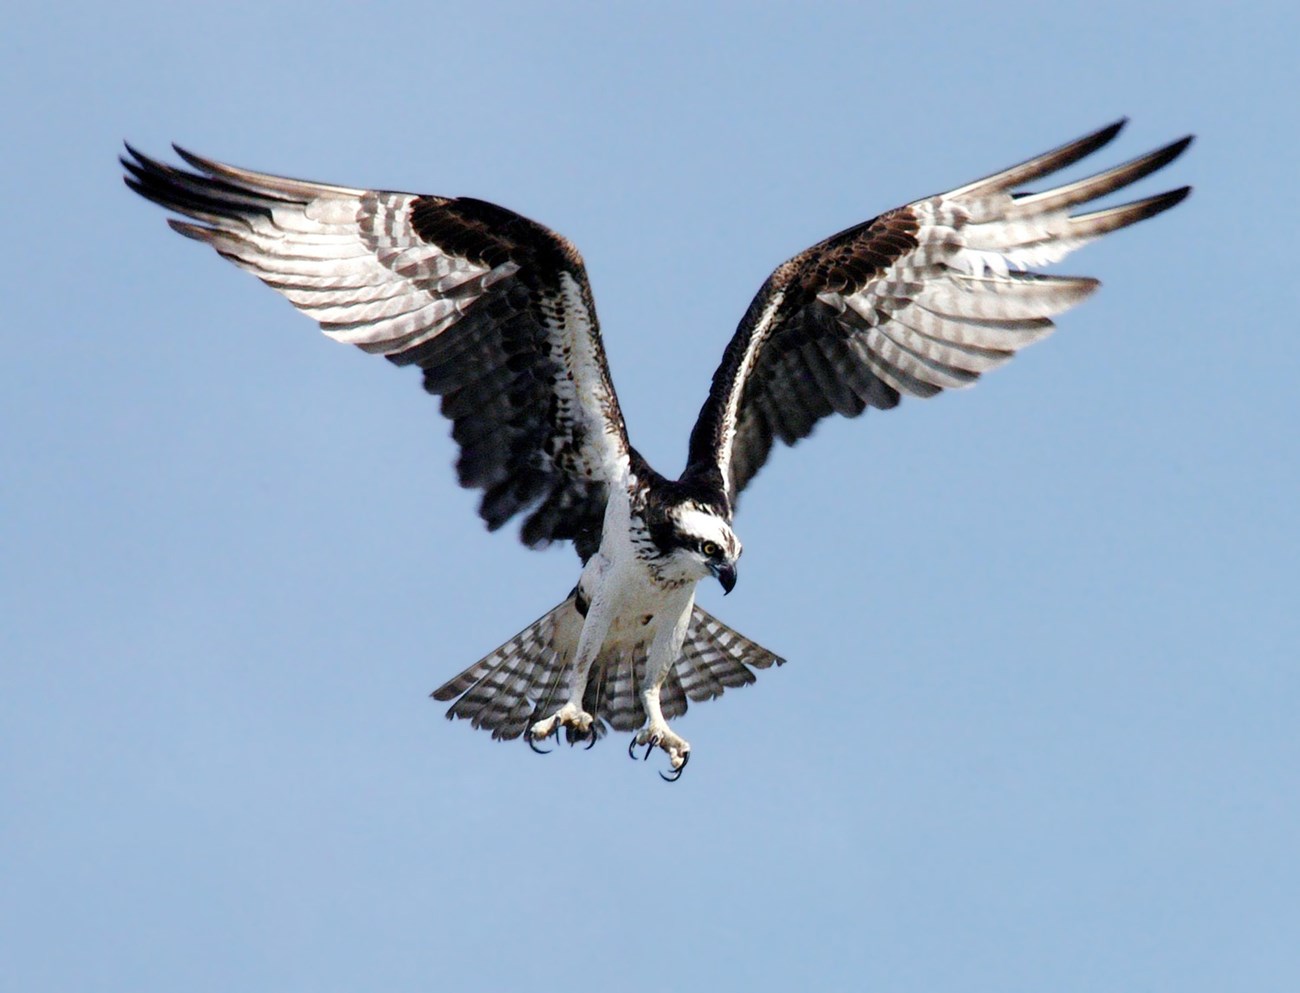 Osprey hovers mid flight with wings spread, scanning the ground for food